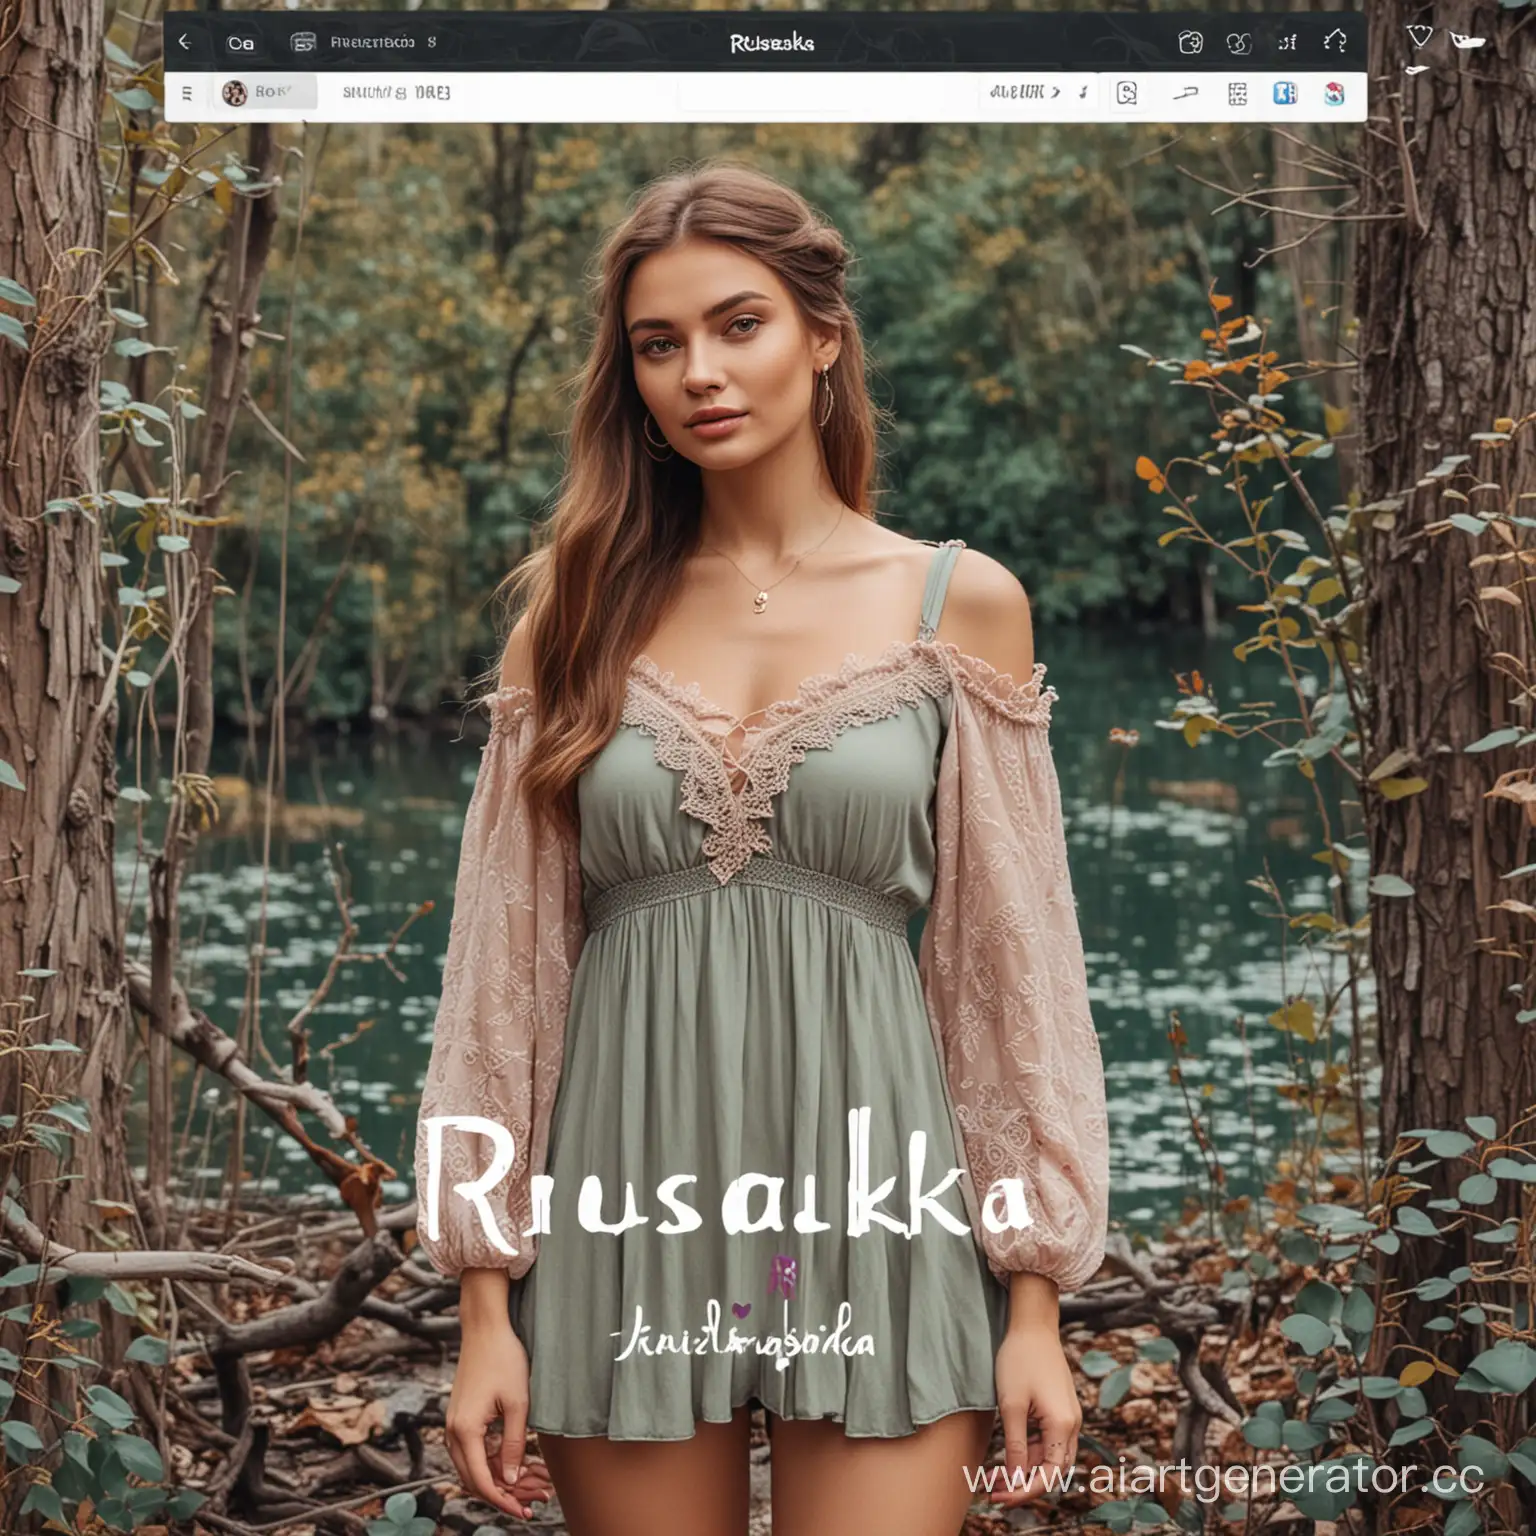 Creative-and-Beautiful-Womens-Clothing-by-Rusalka-on-Instagram